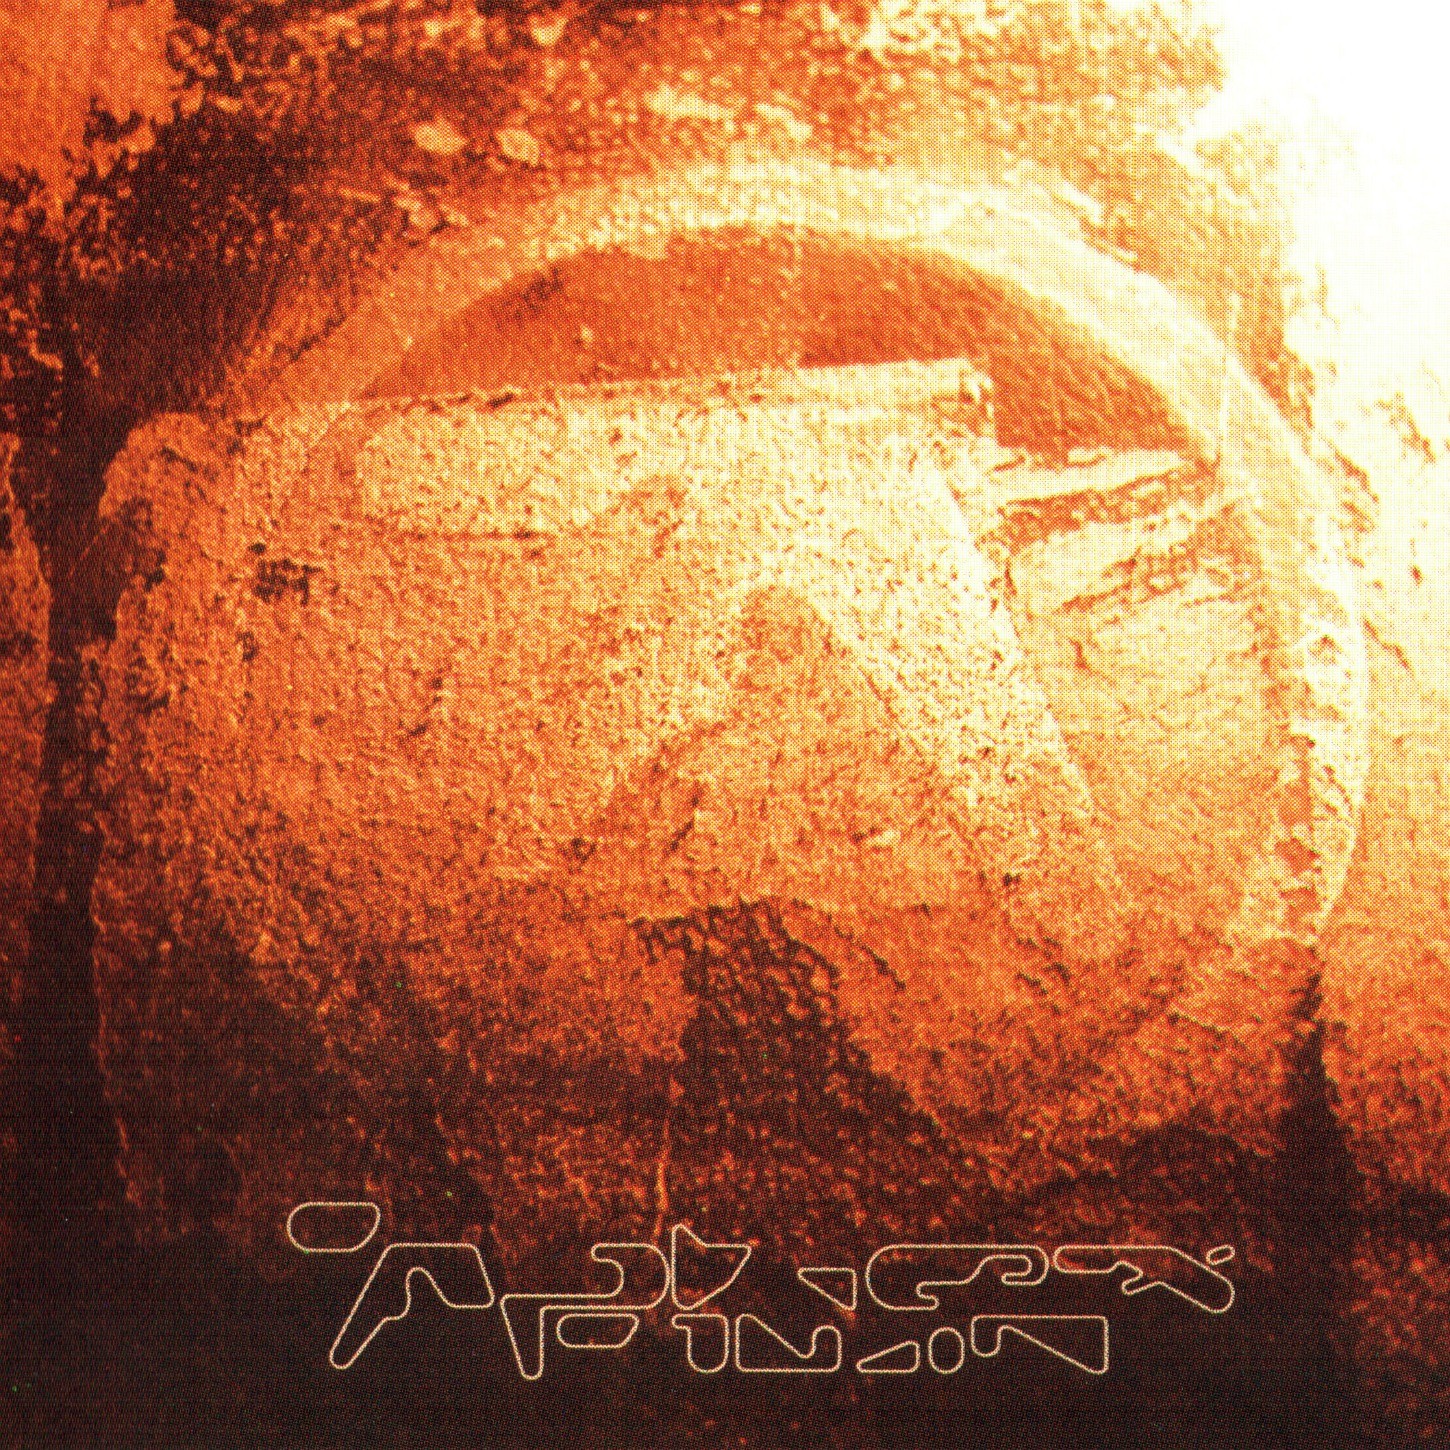 HOT送料無料 Aphex Twin Selected Ambient works 新品レコードの通販